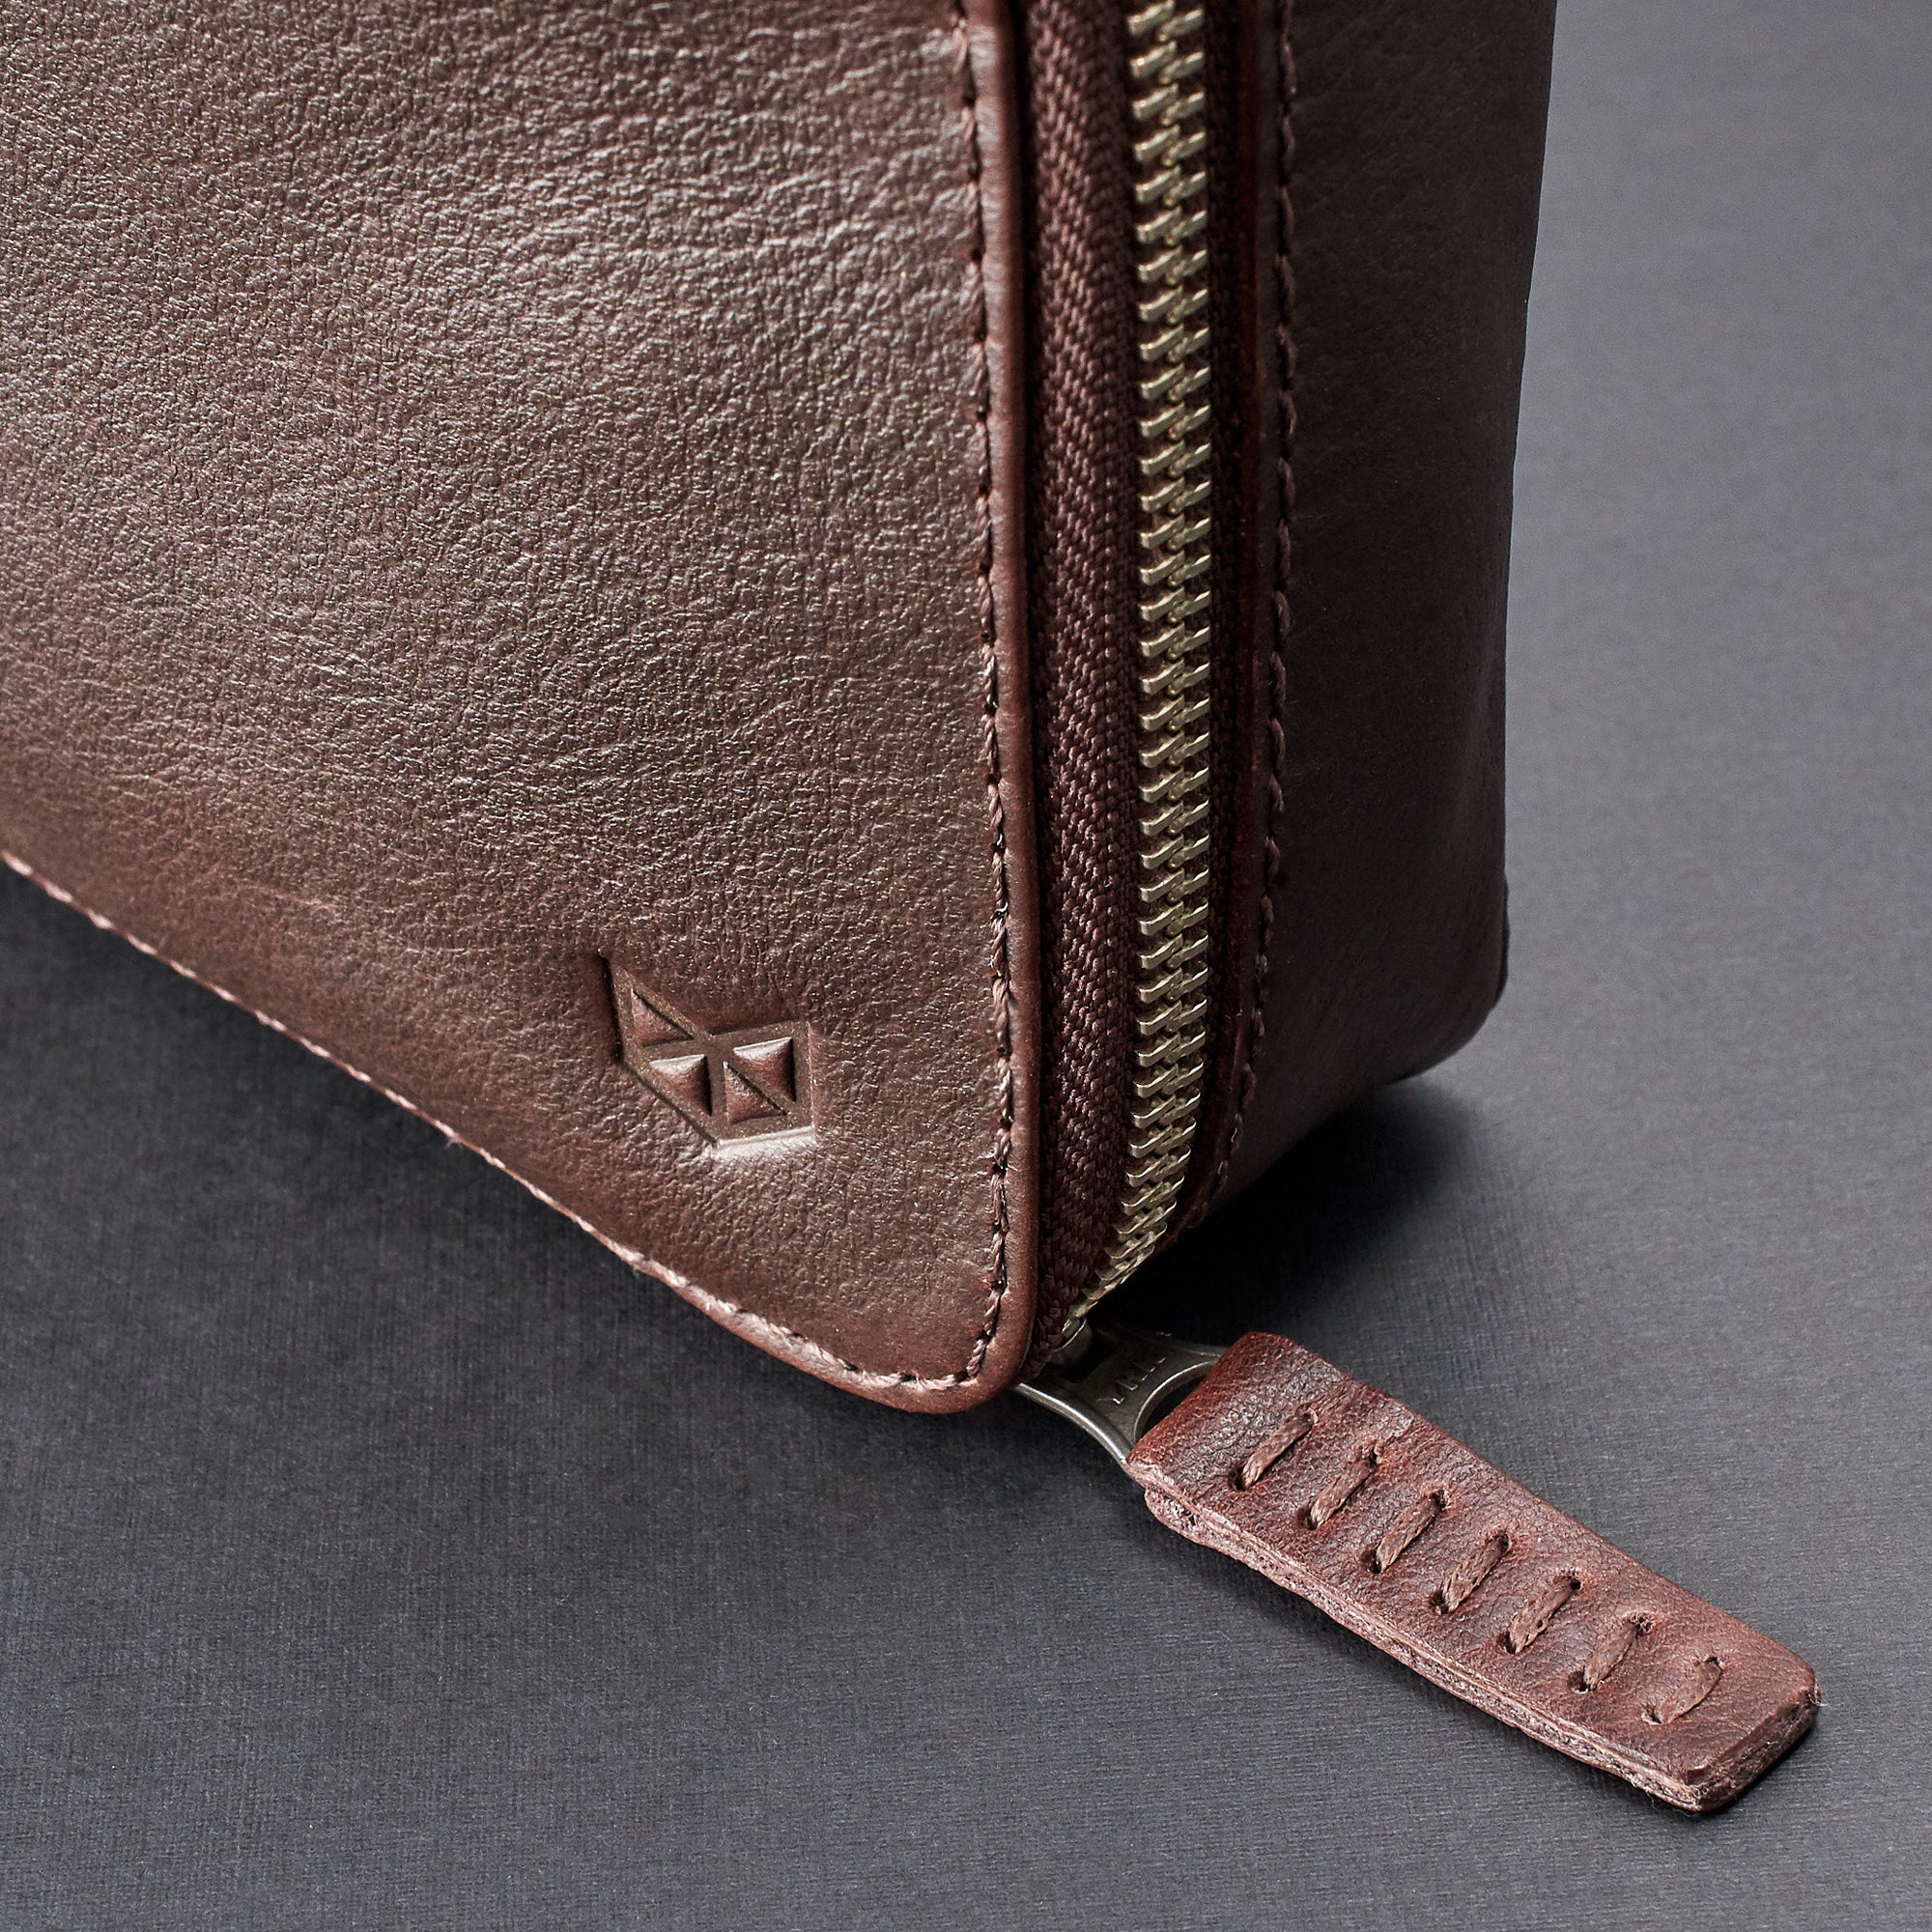 Hand stitched pull tabs. Dark Brown EDC gear bag by Capra Leather